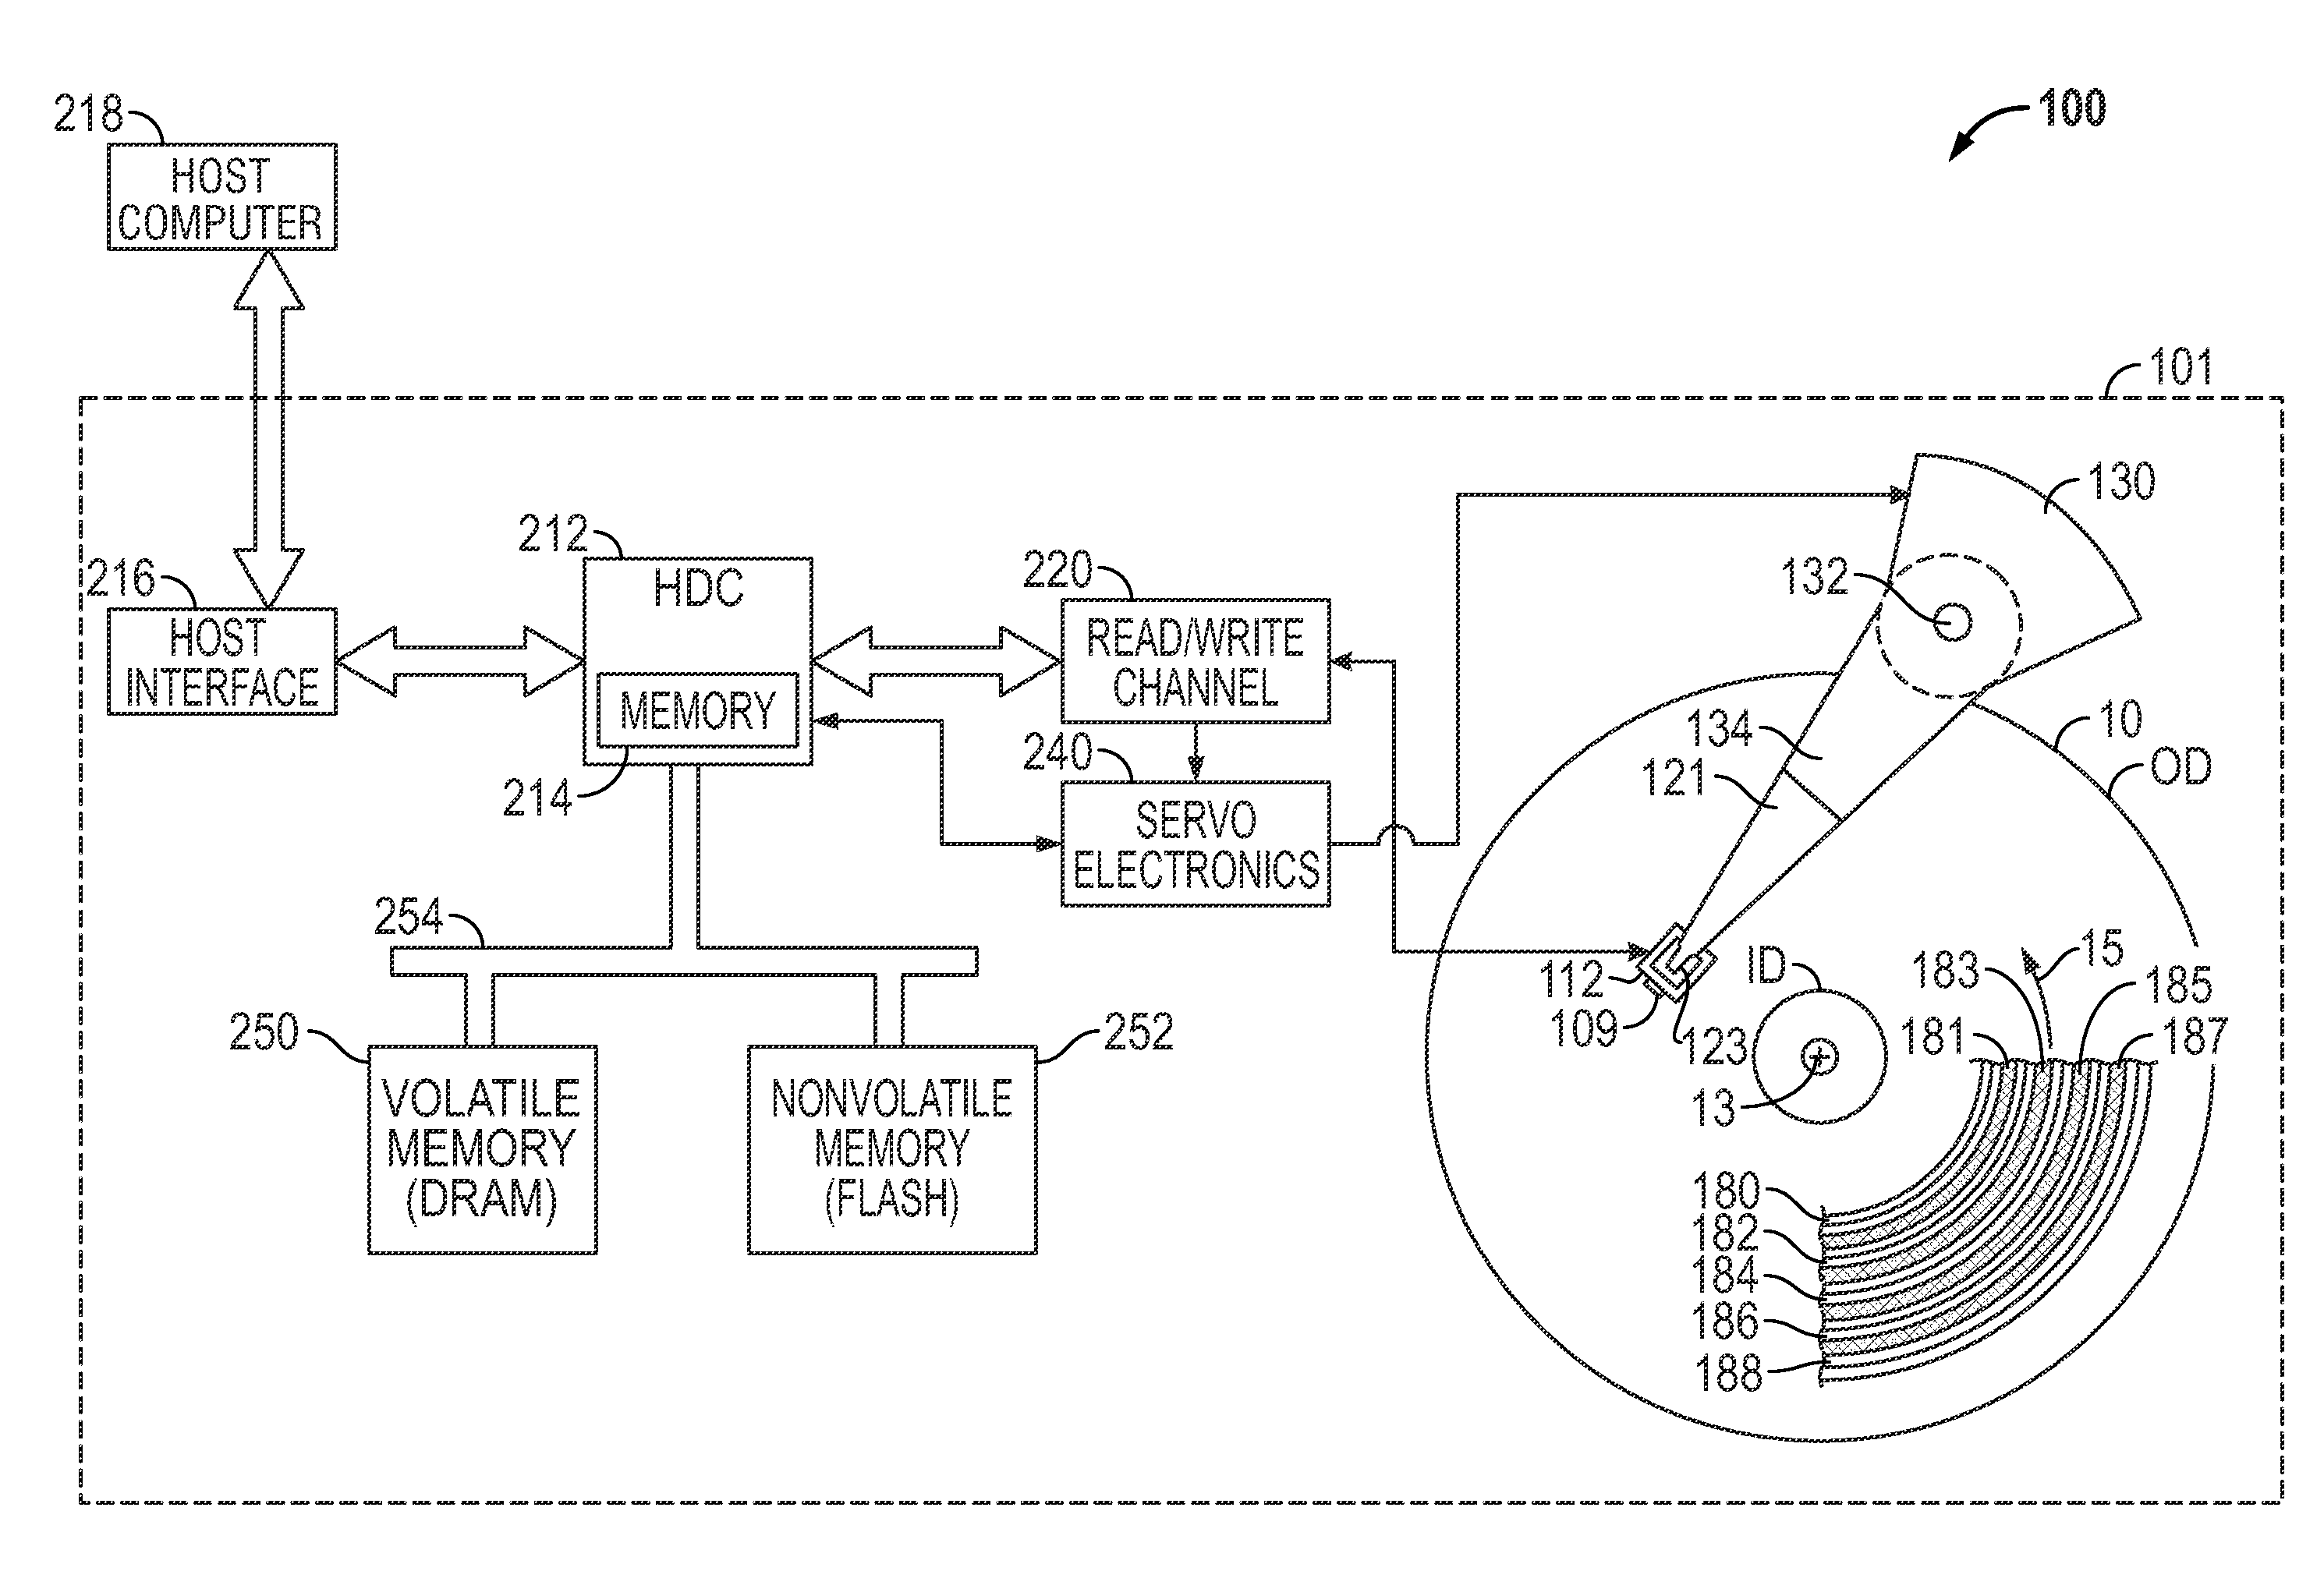 Shingled magnetic recording disk drive with inter-band disk cache and minimization of the effect of far track erasure on adjacent data bands